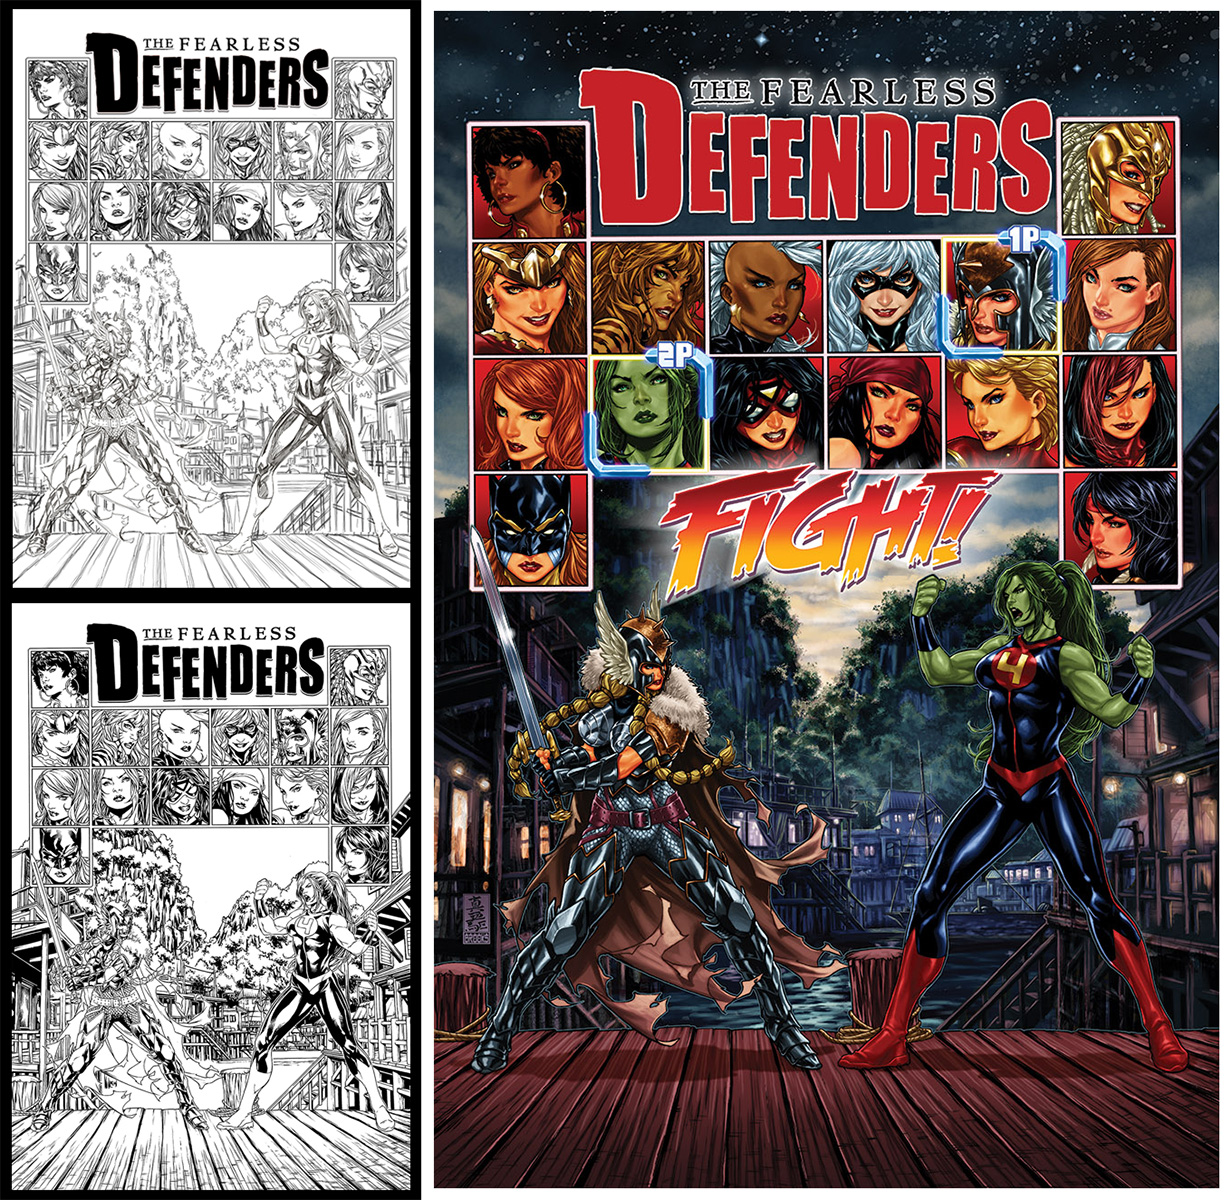 High Resolution Wallpaper | The Fearless Defenders 1232x1200 px